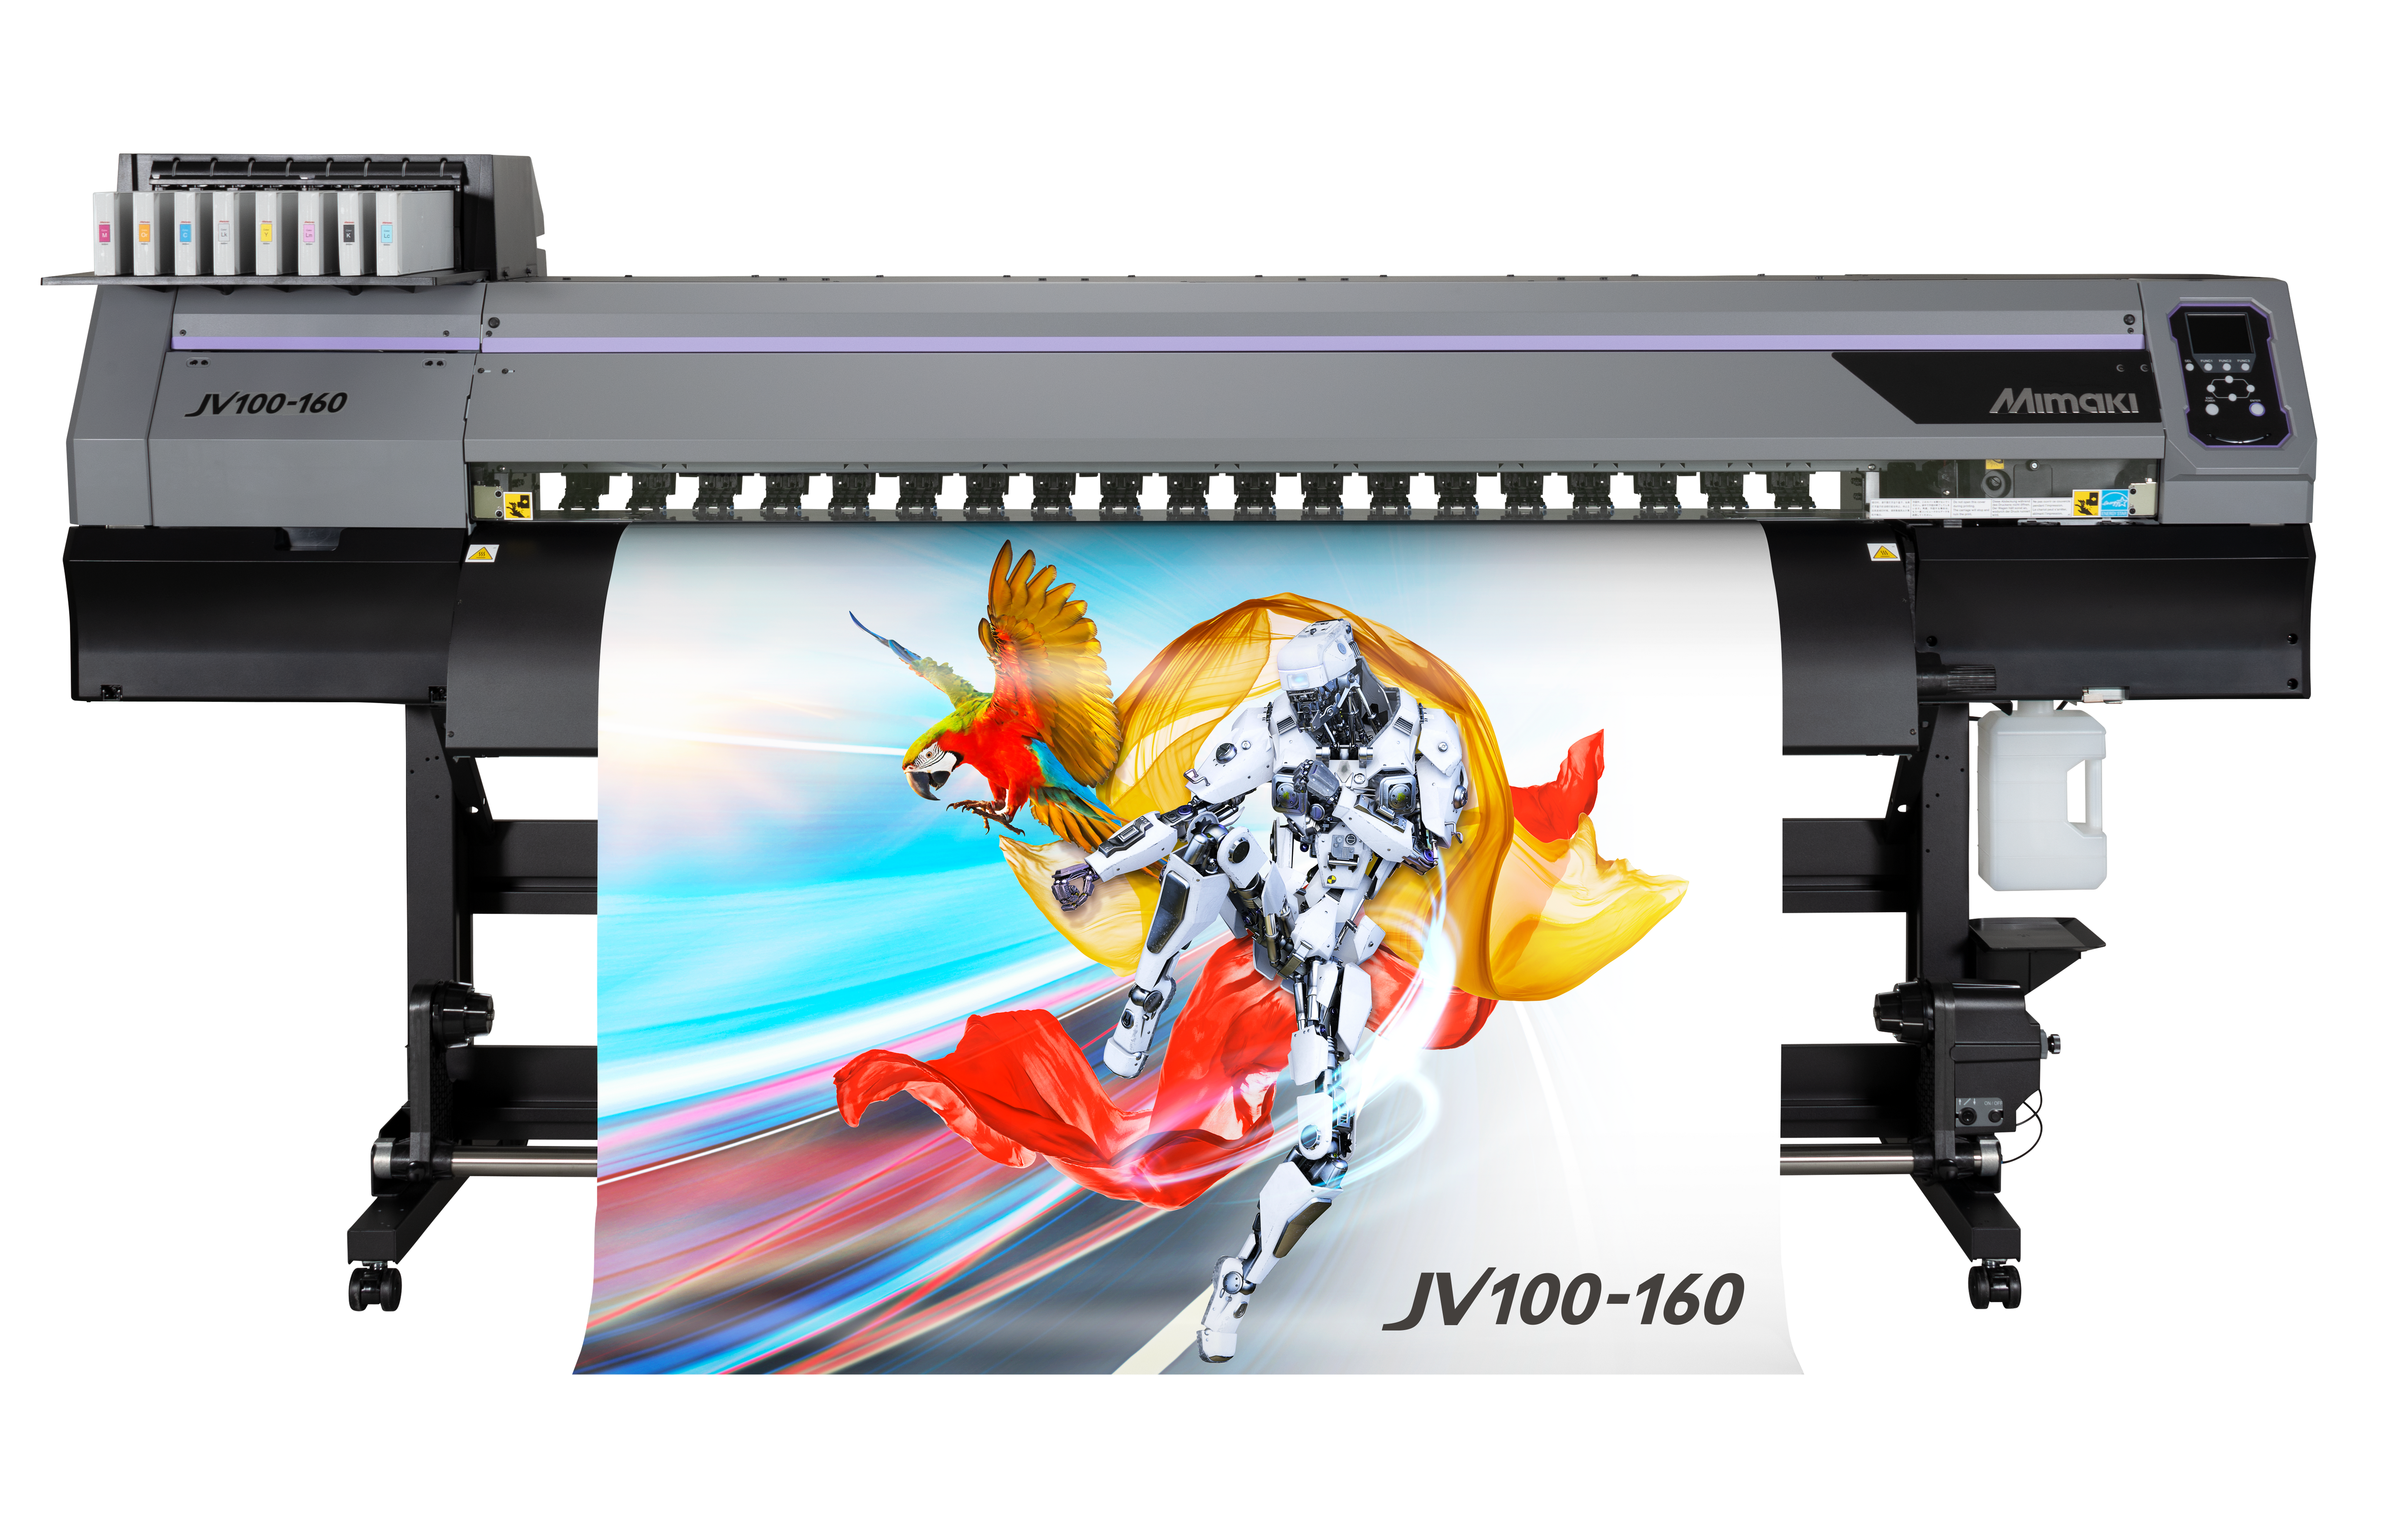 mimaki jv100-160 front view of application printing. Parrot and robot print colorful print